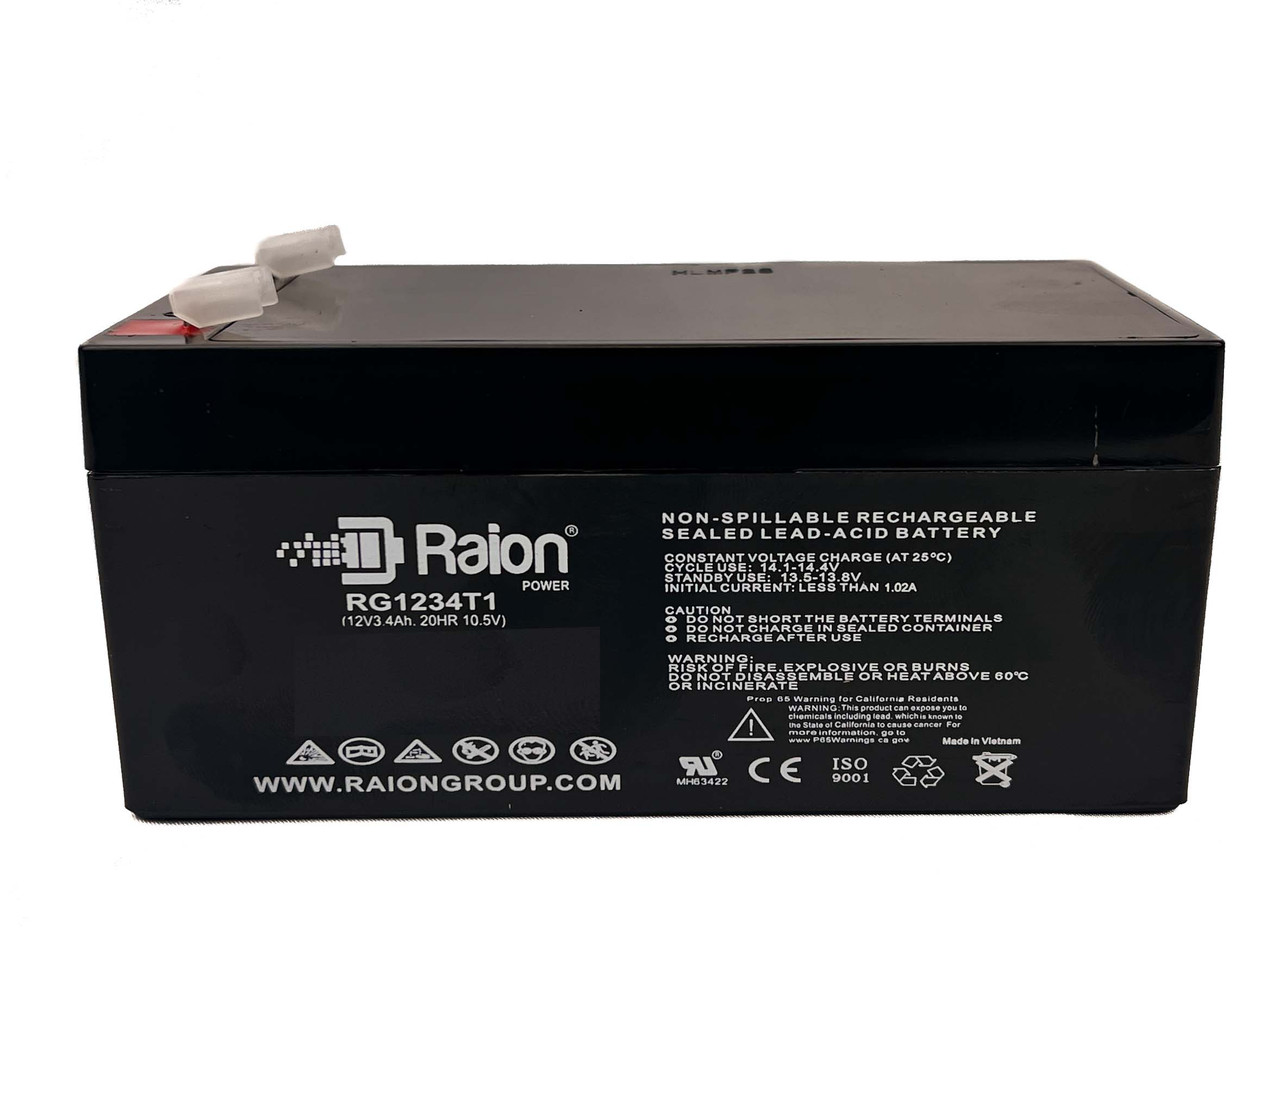 Raion Power RG1234T1 Rechargeable Compatible Replacement Battery for Toro # 106-8397 Lawn Mower